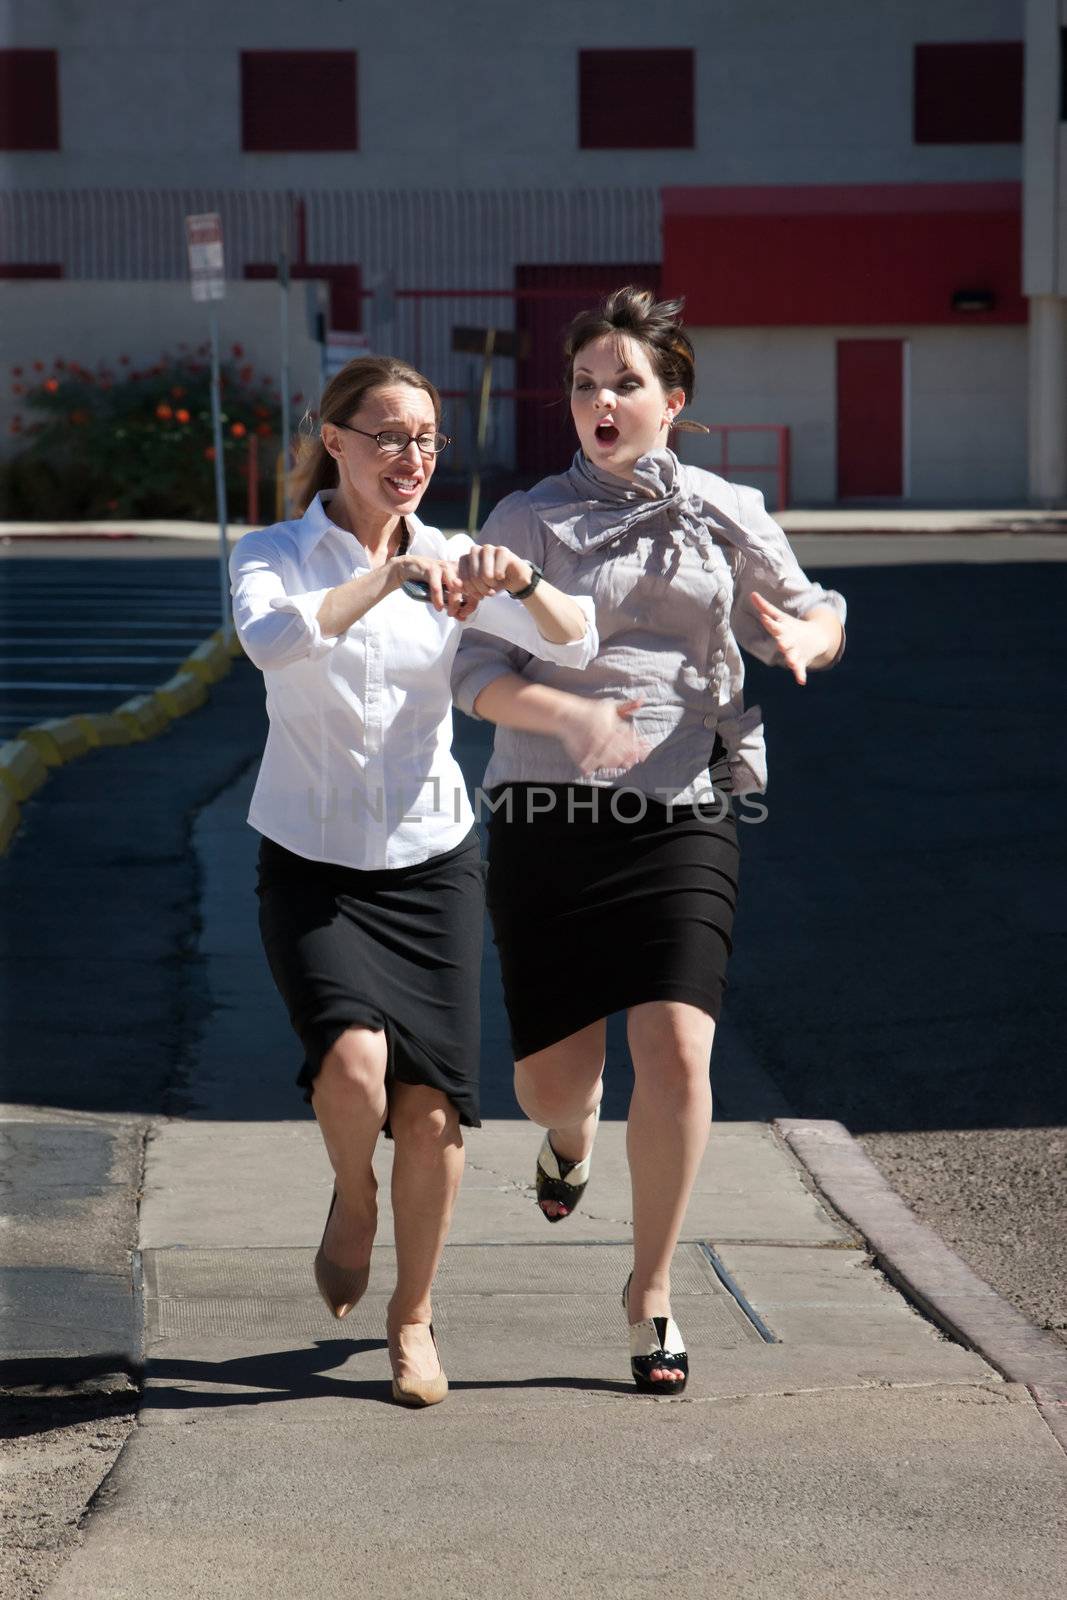 Two women are late for work and running.